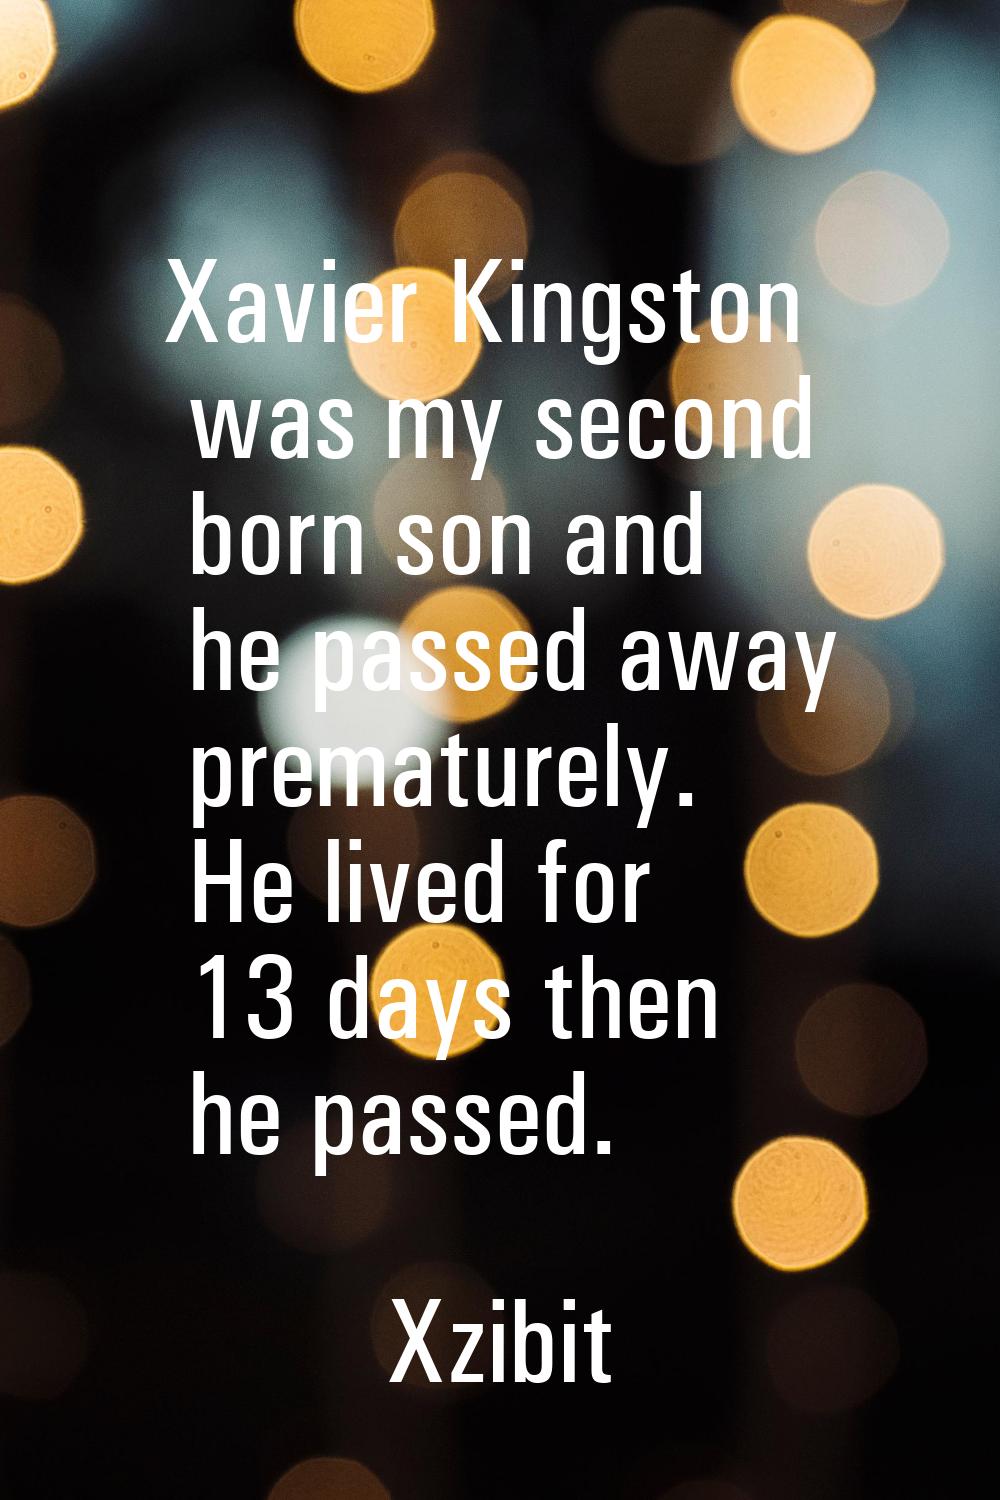 Xavier Kingston was my second born son and he passed away prematurely. He lived for 13 days then he